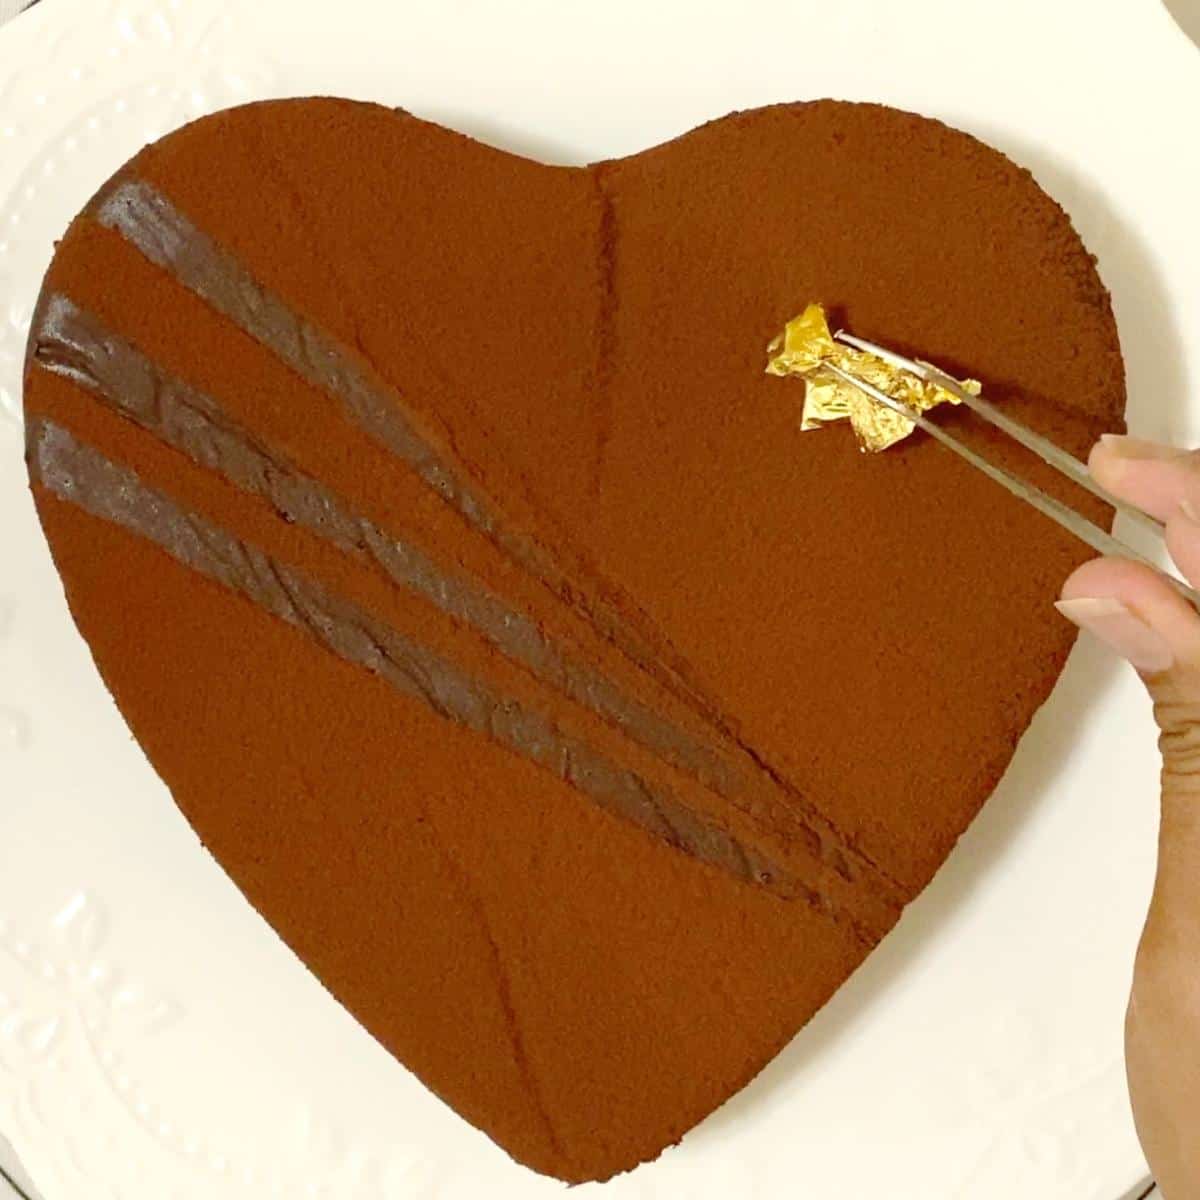 A heart terrine dusted with cocoa powder.